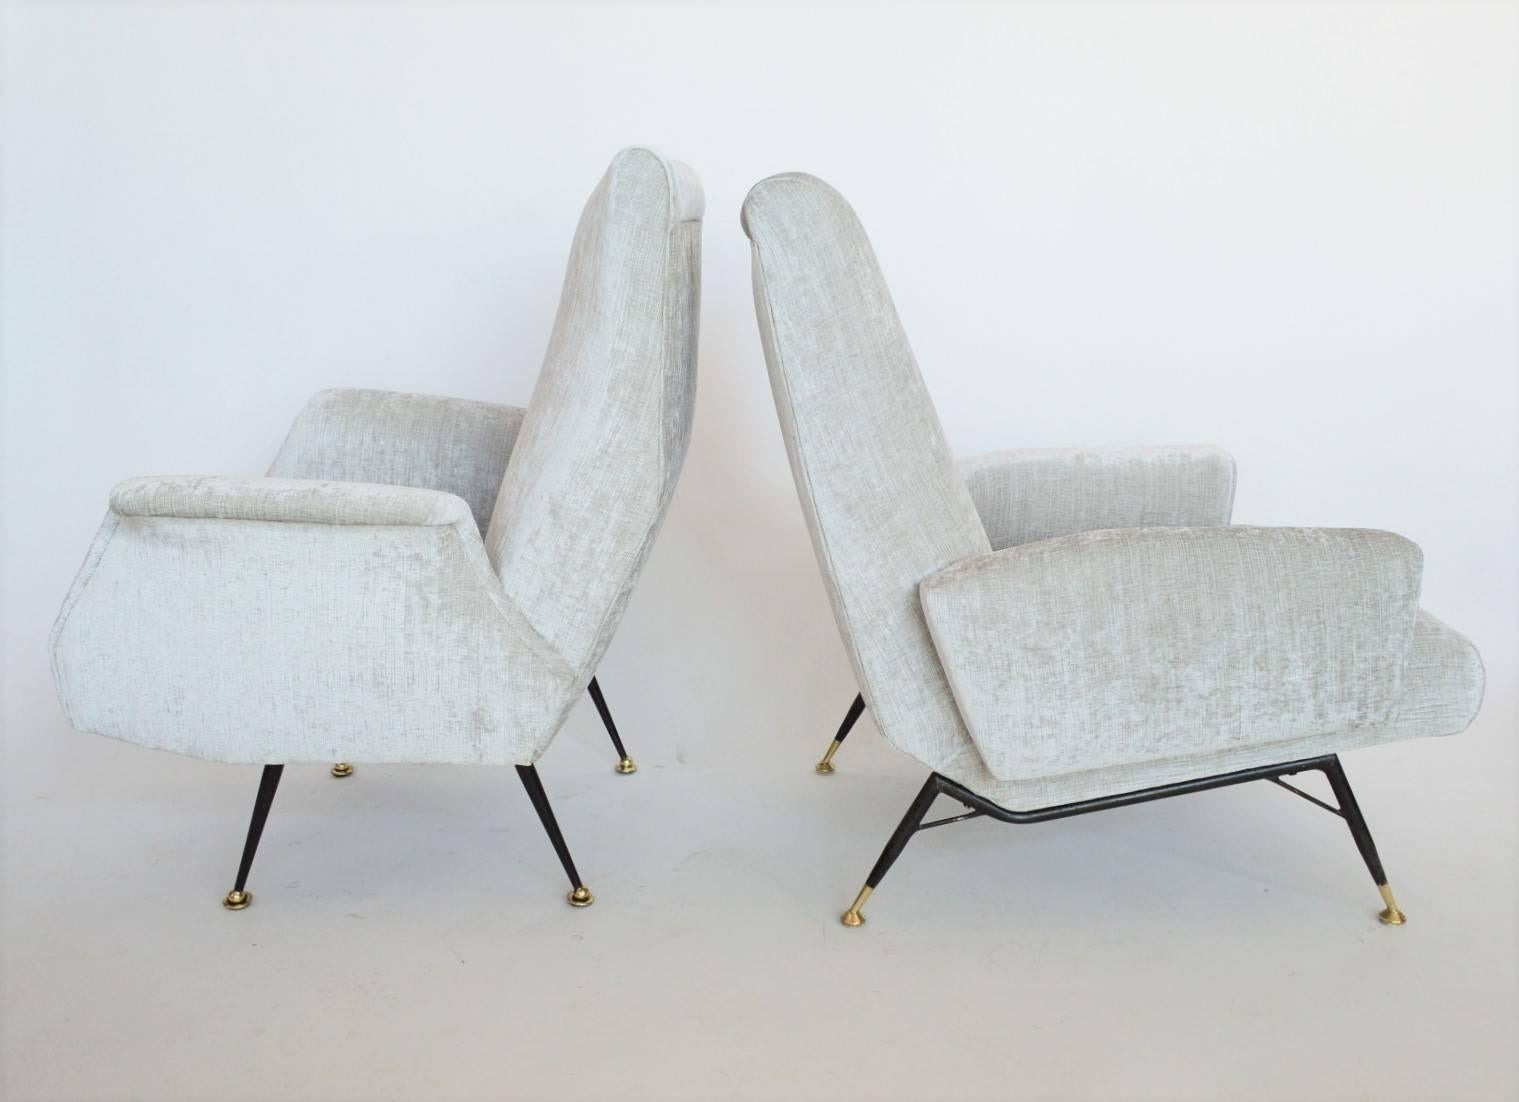 Polished Italian Midcentury Armchair in White Chenille and Brass, 1950s